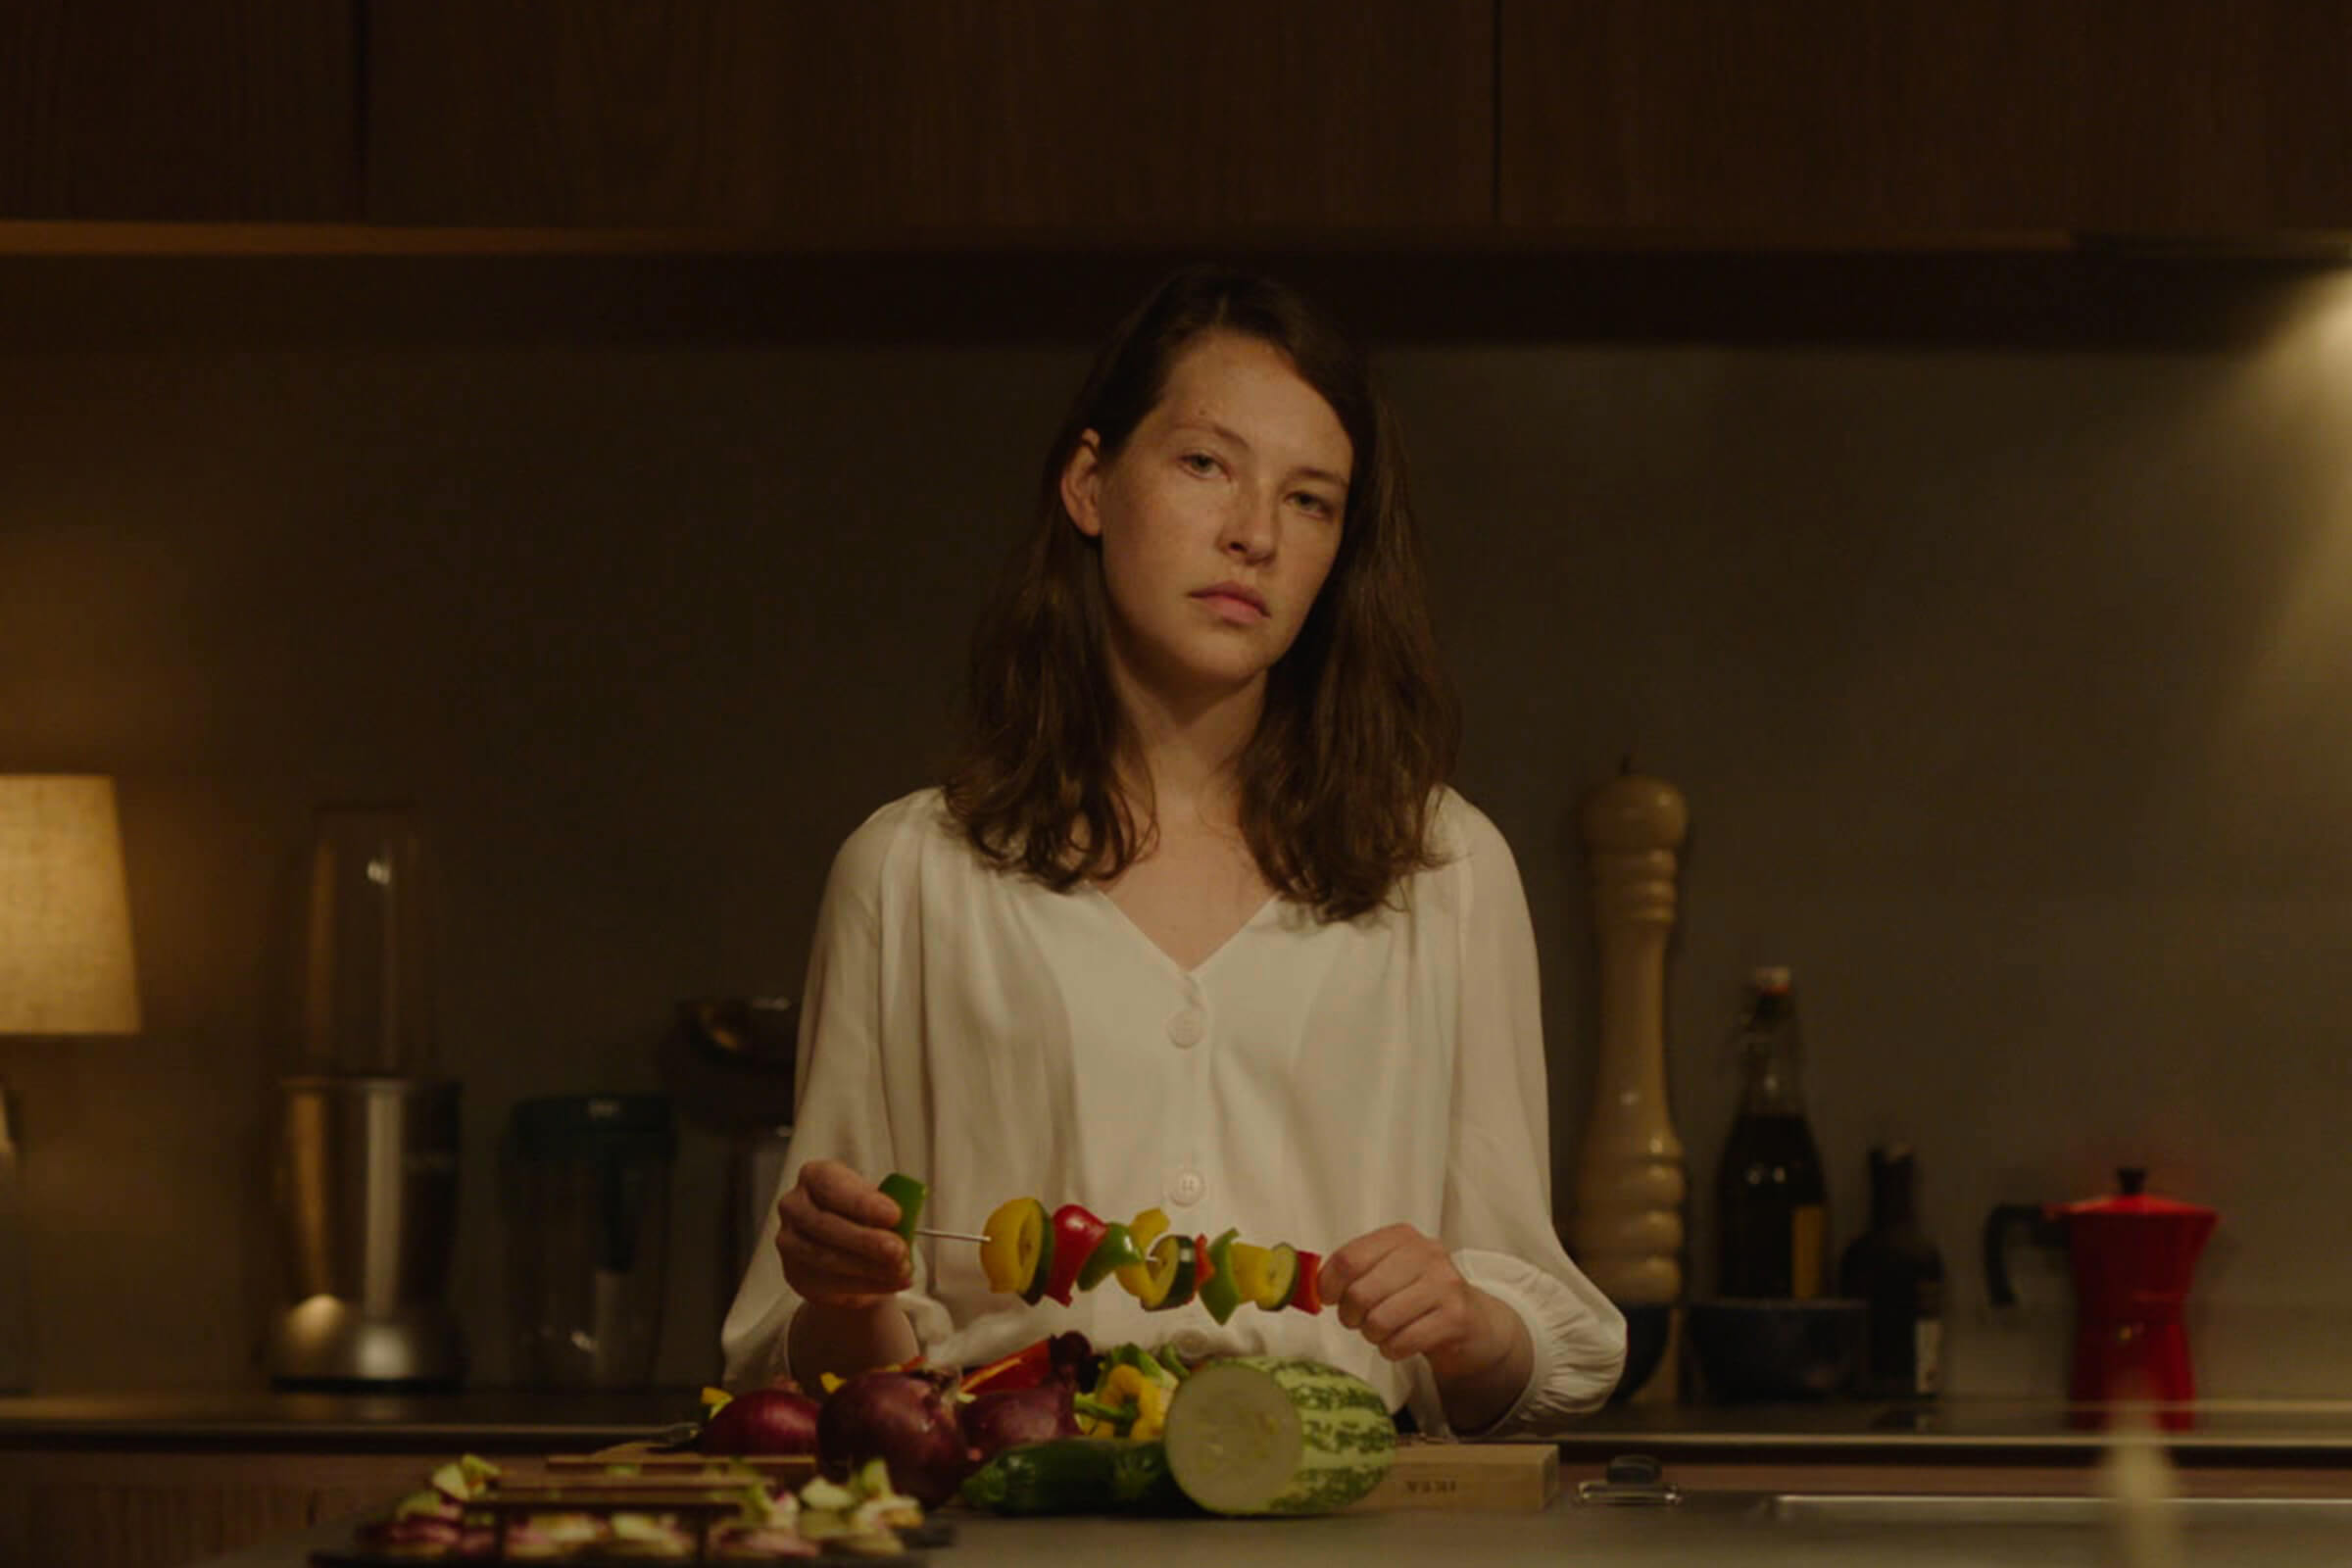 Image from The Feast (2021)